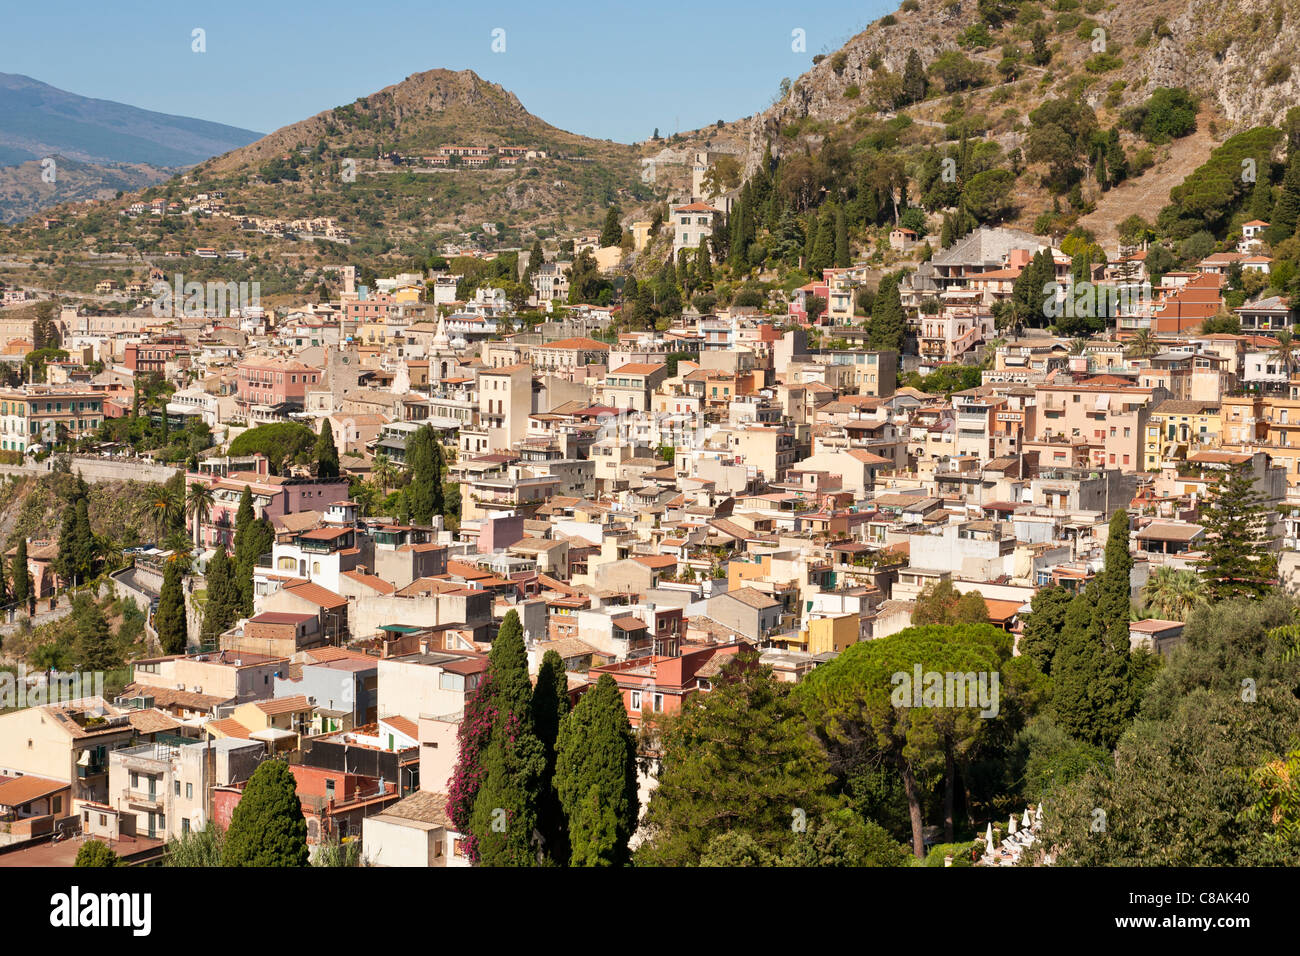 View of the town of Taormina, Sicily, Italy Stock Photo